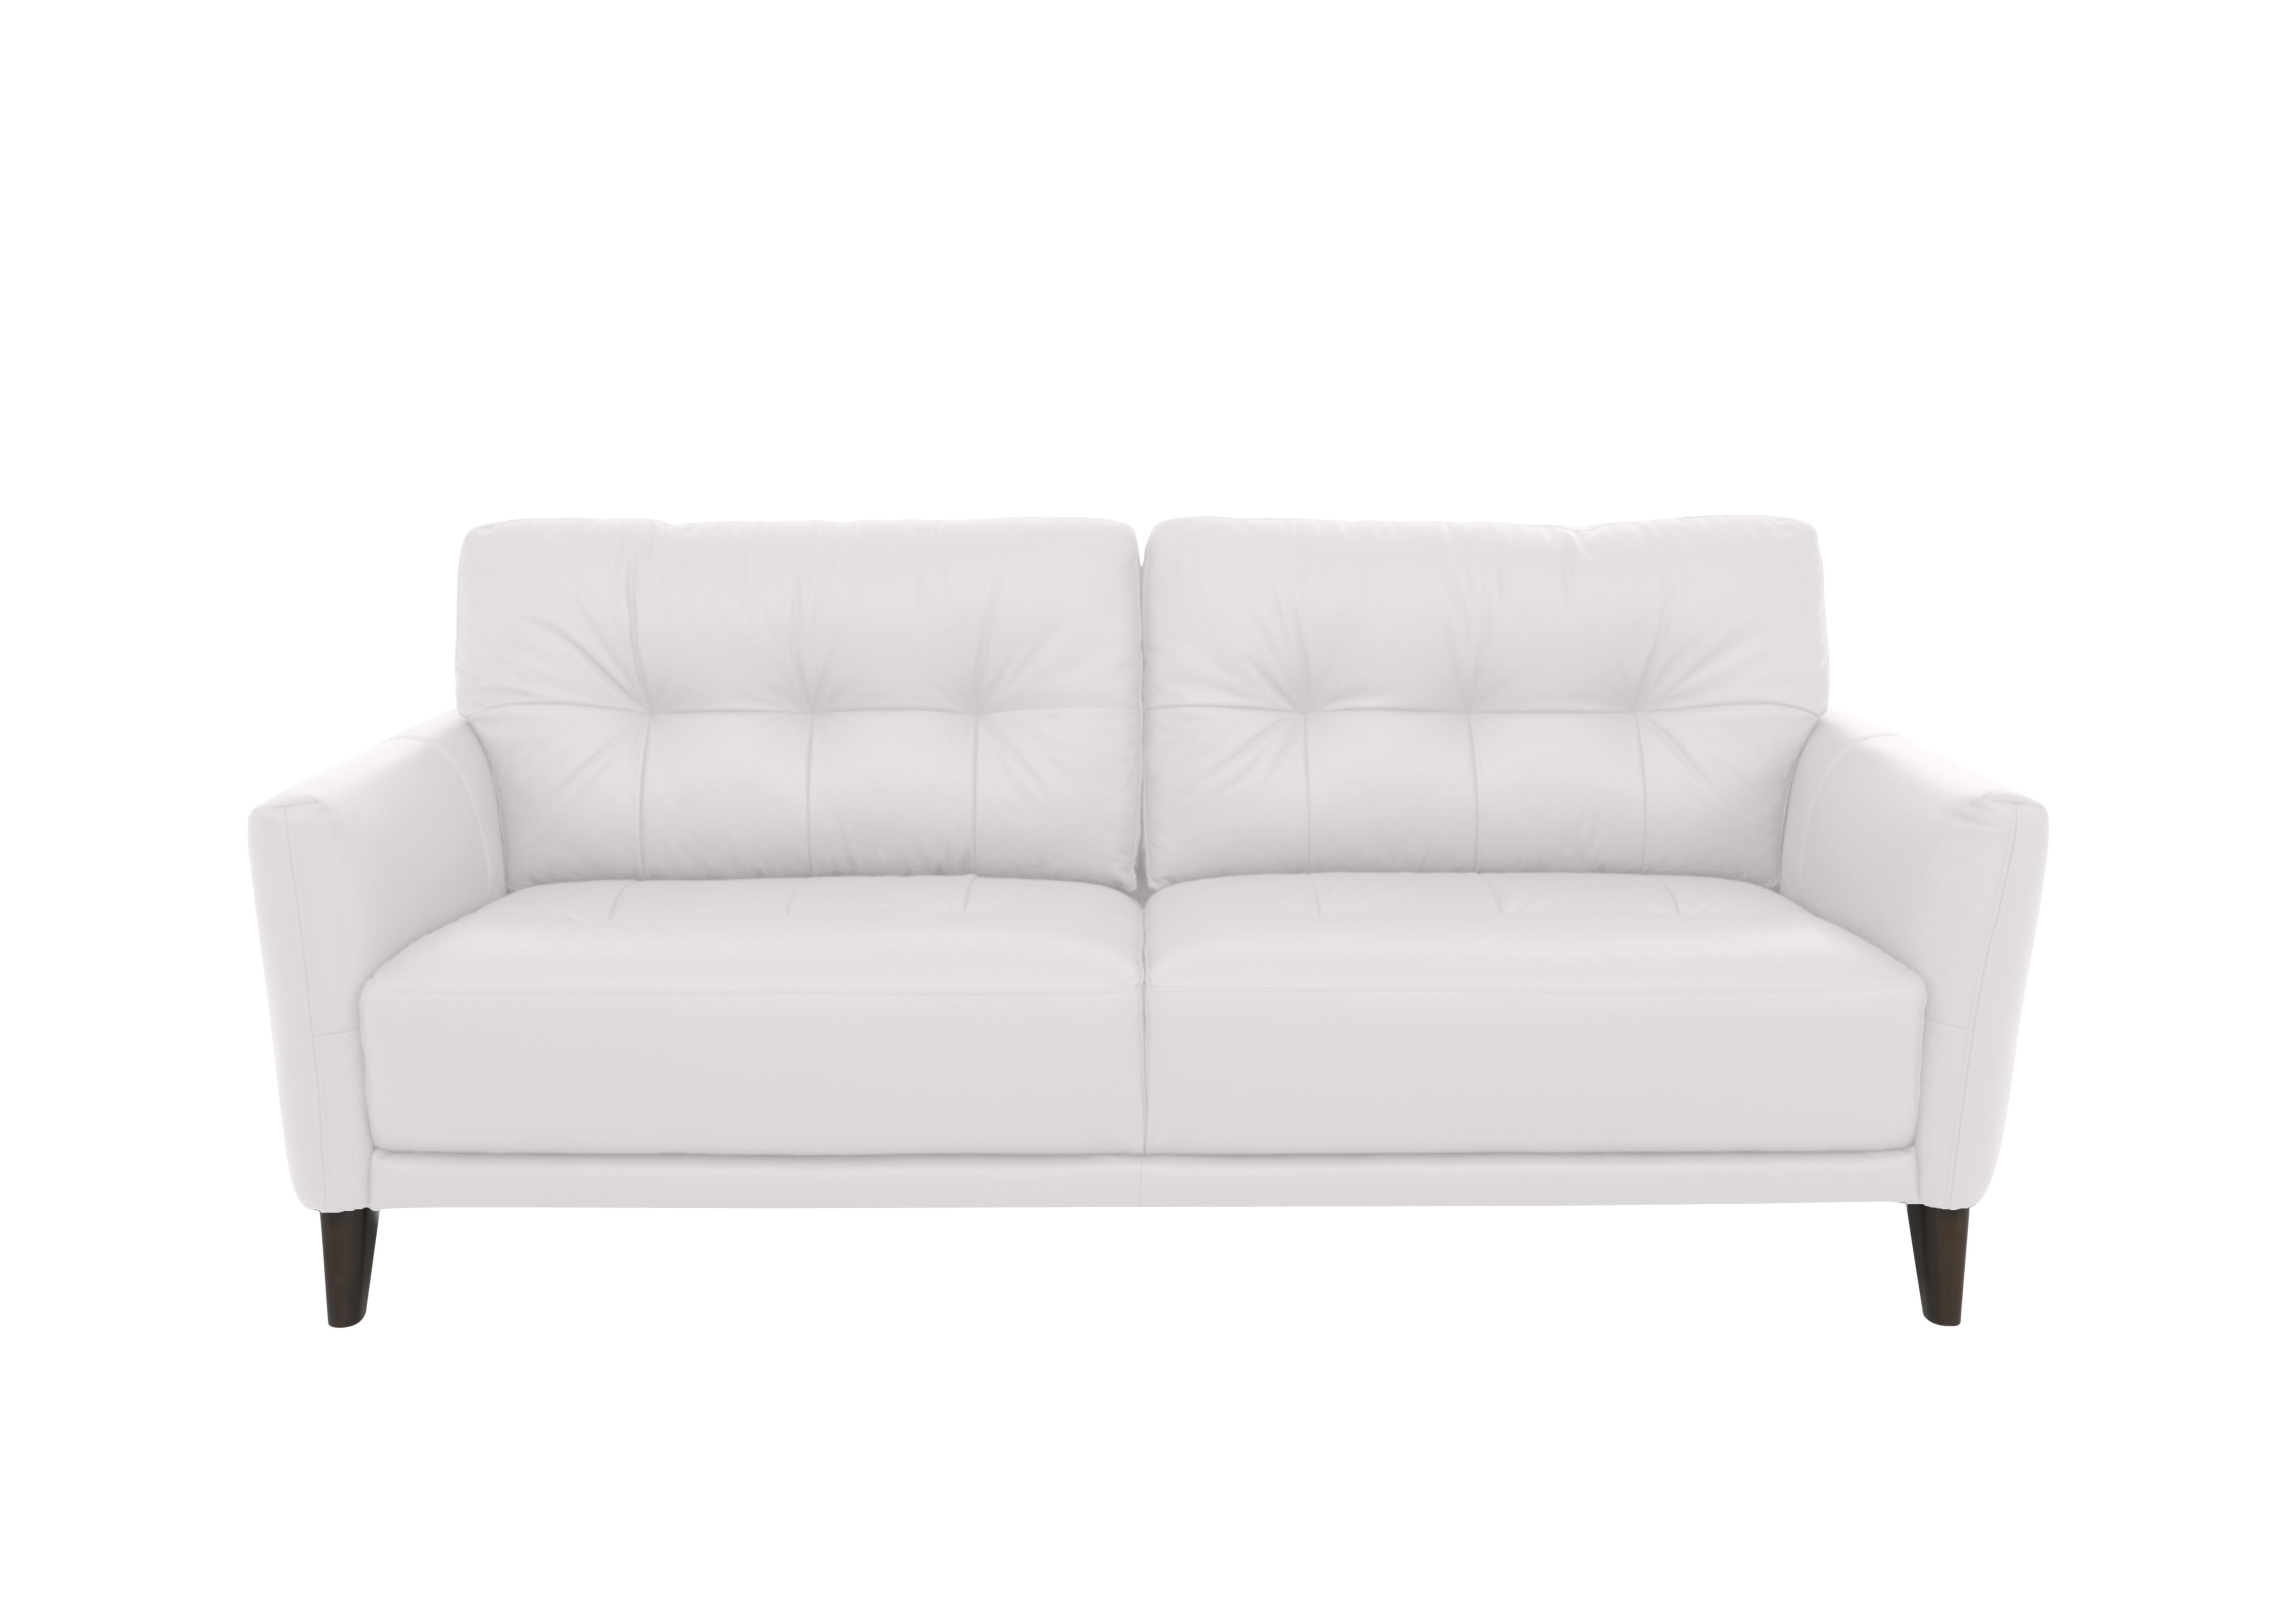 Uno Leather 3 Seater Sofa in Bv-744d Star White on Furniture Village